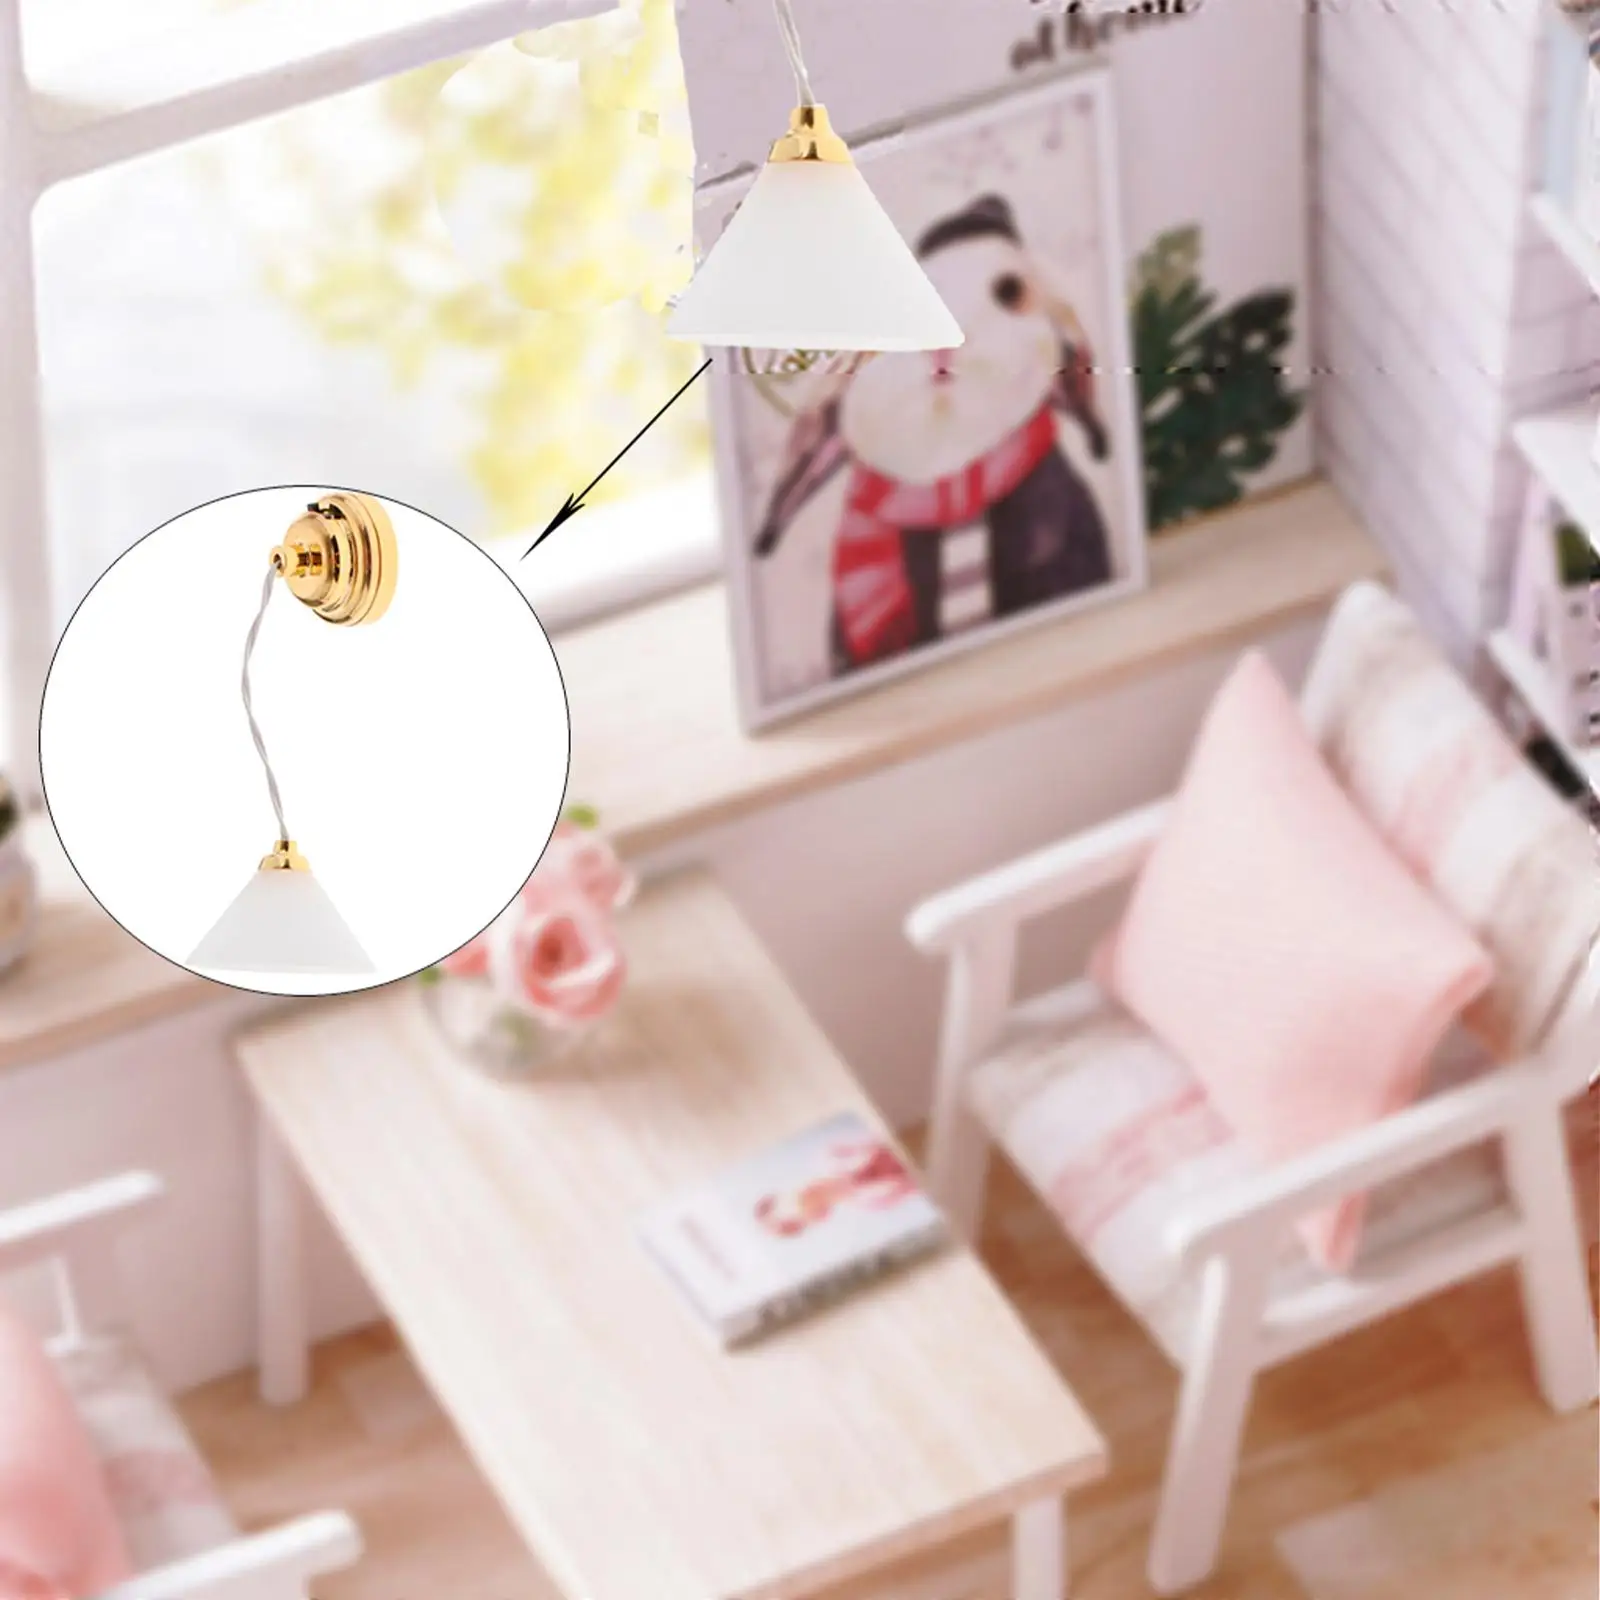 Miniature Dollhouse Ceiling Lamp mini size led Light for Dolls House Furniture Functional 1/12 Scale Dolls House Decorations